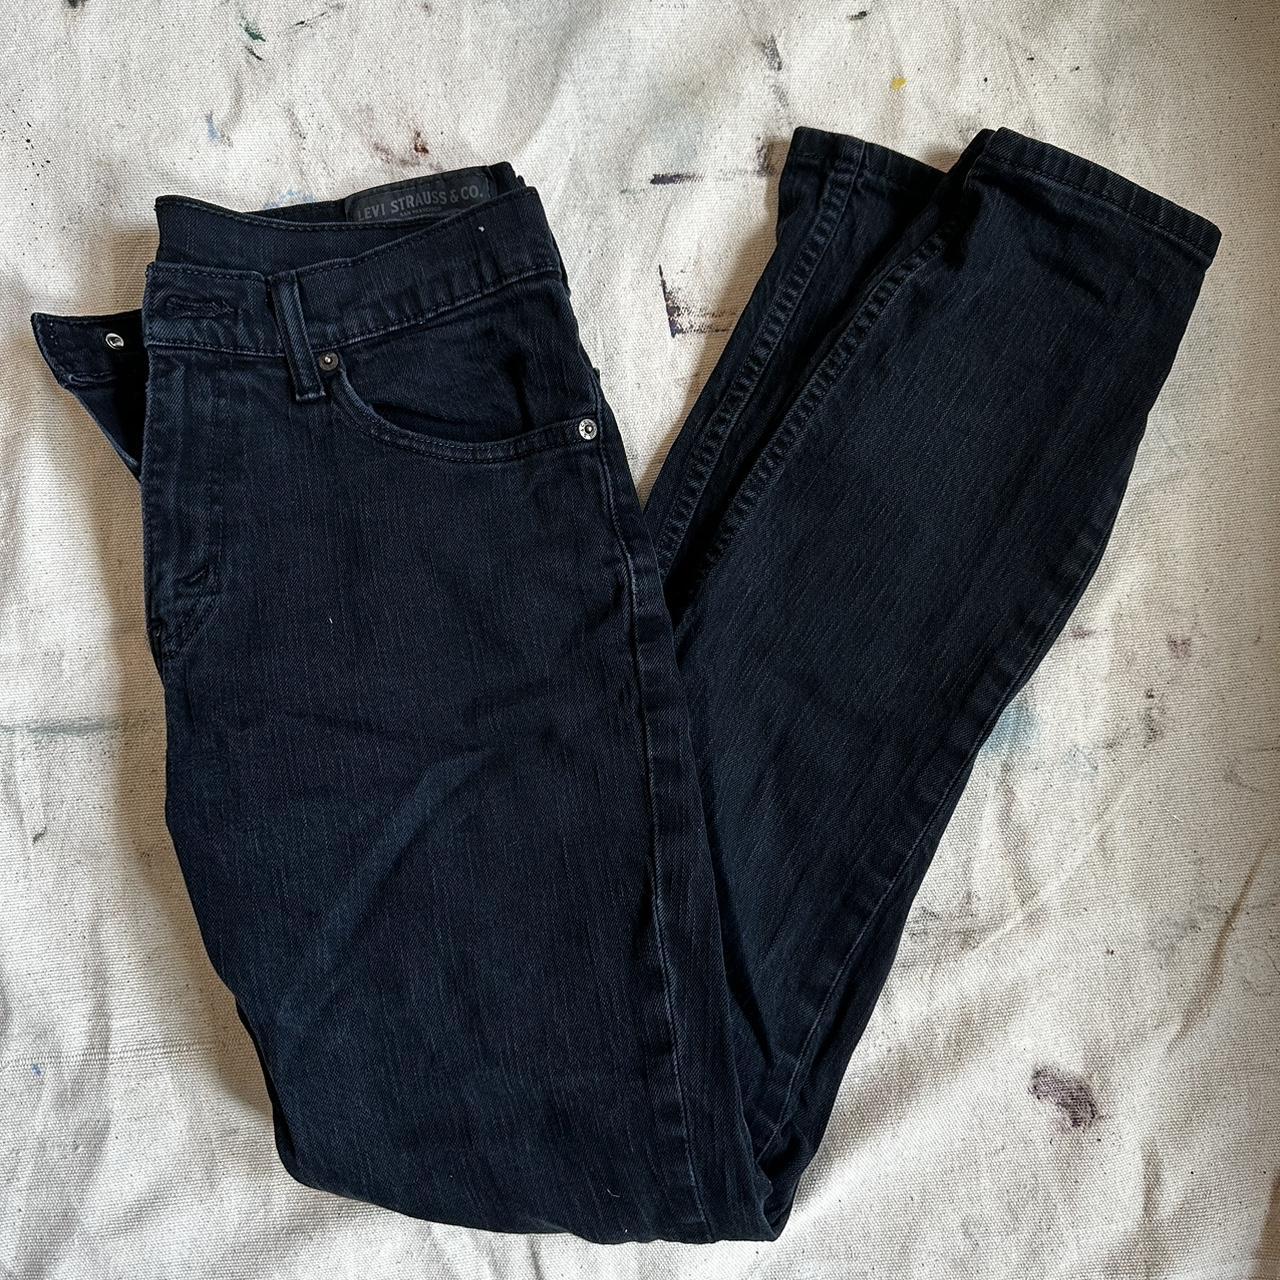 Levi’s 511 Made in Mexico Some wear. Hole in back... - Depop